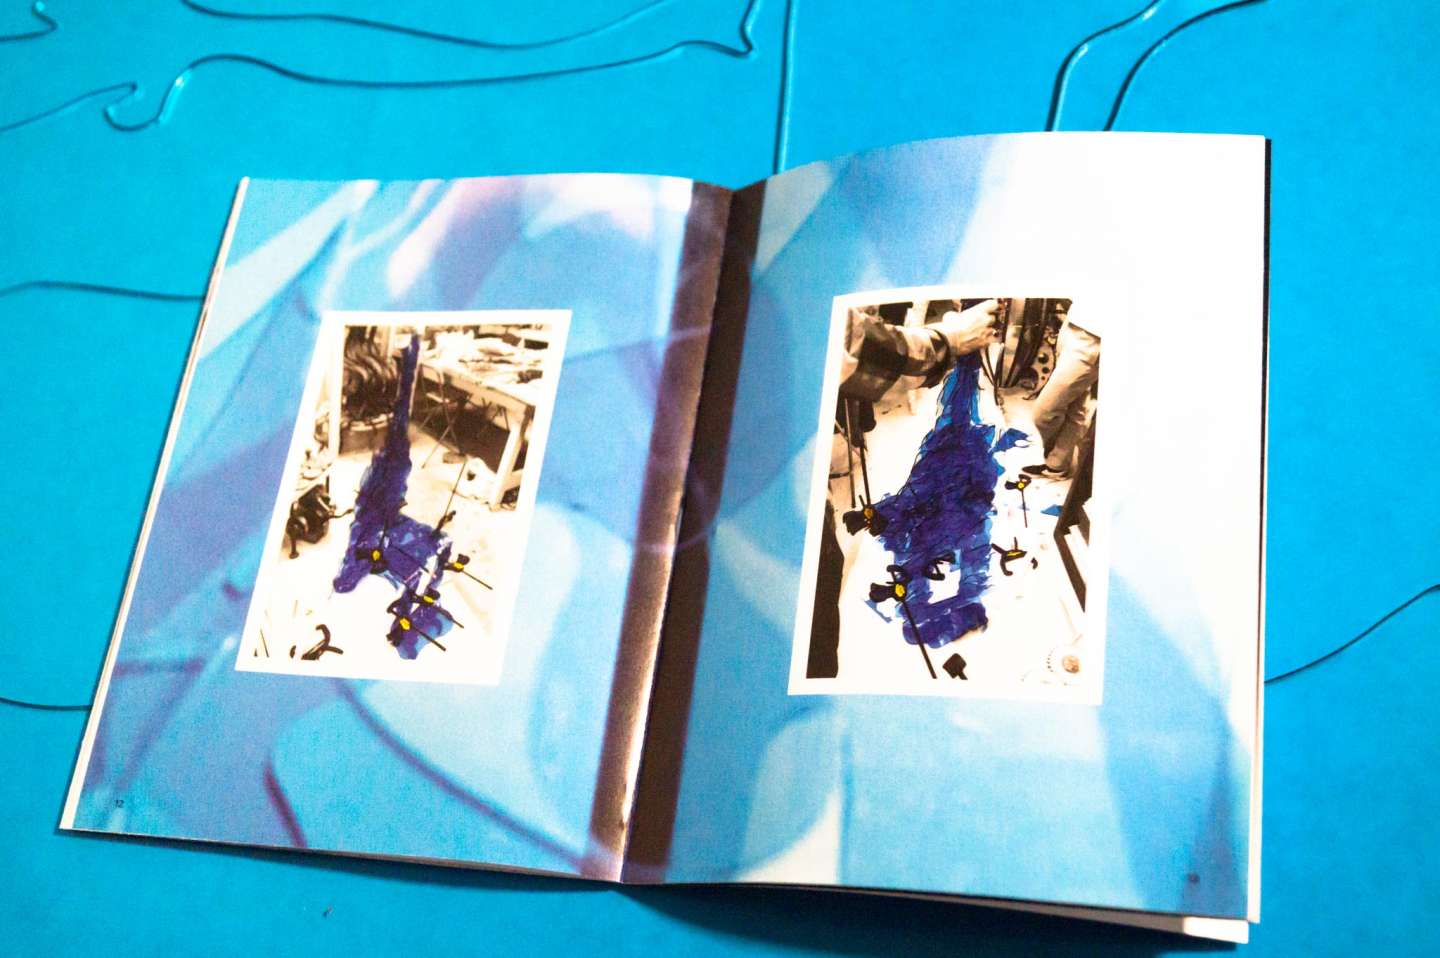 Brochure Design/ The Sound of Water: Blue Chair